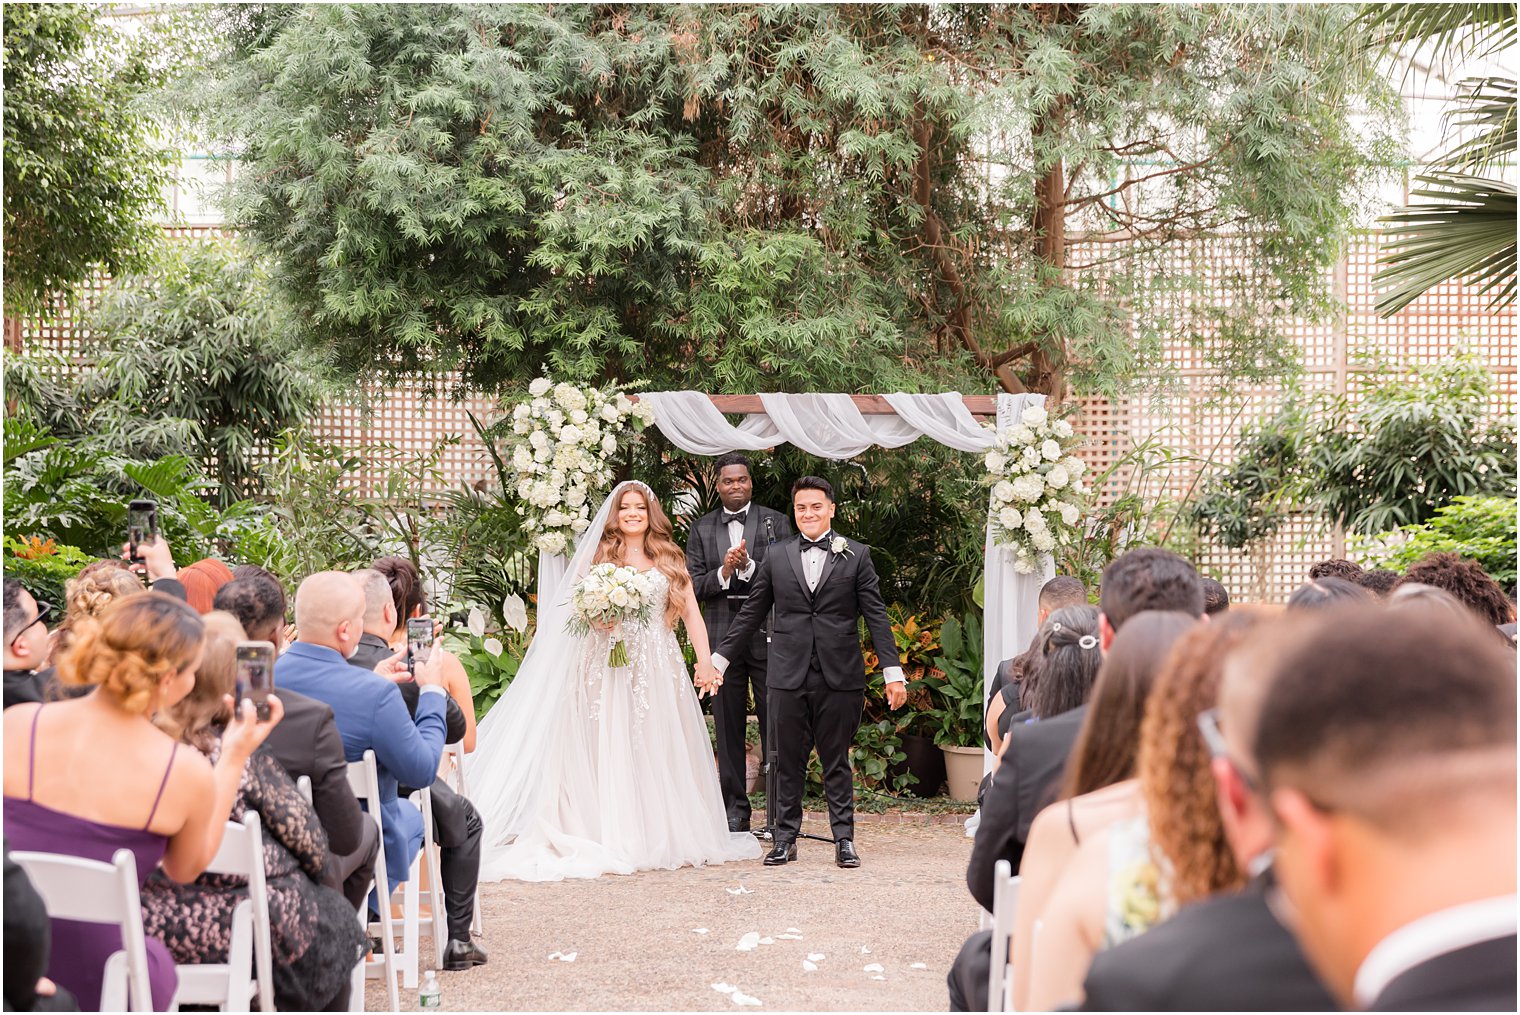 couple turns to walk up aisle at Fairmont Park Horticulture Center wedding in greenhouse